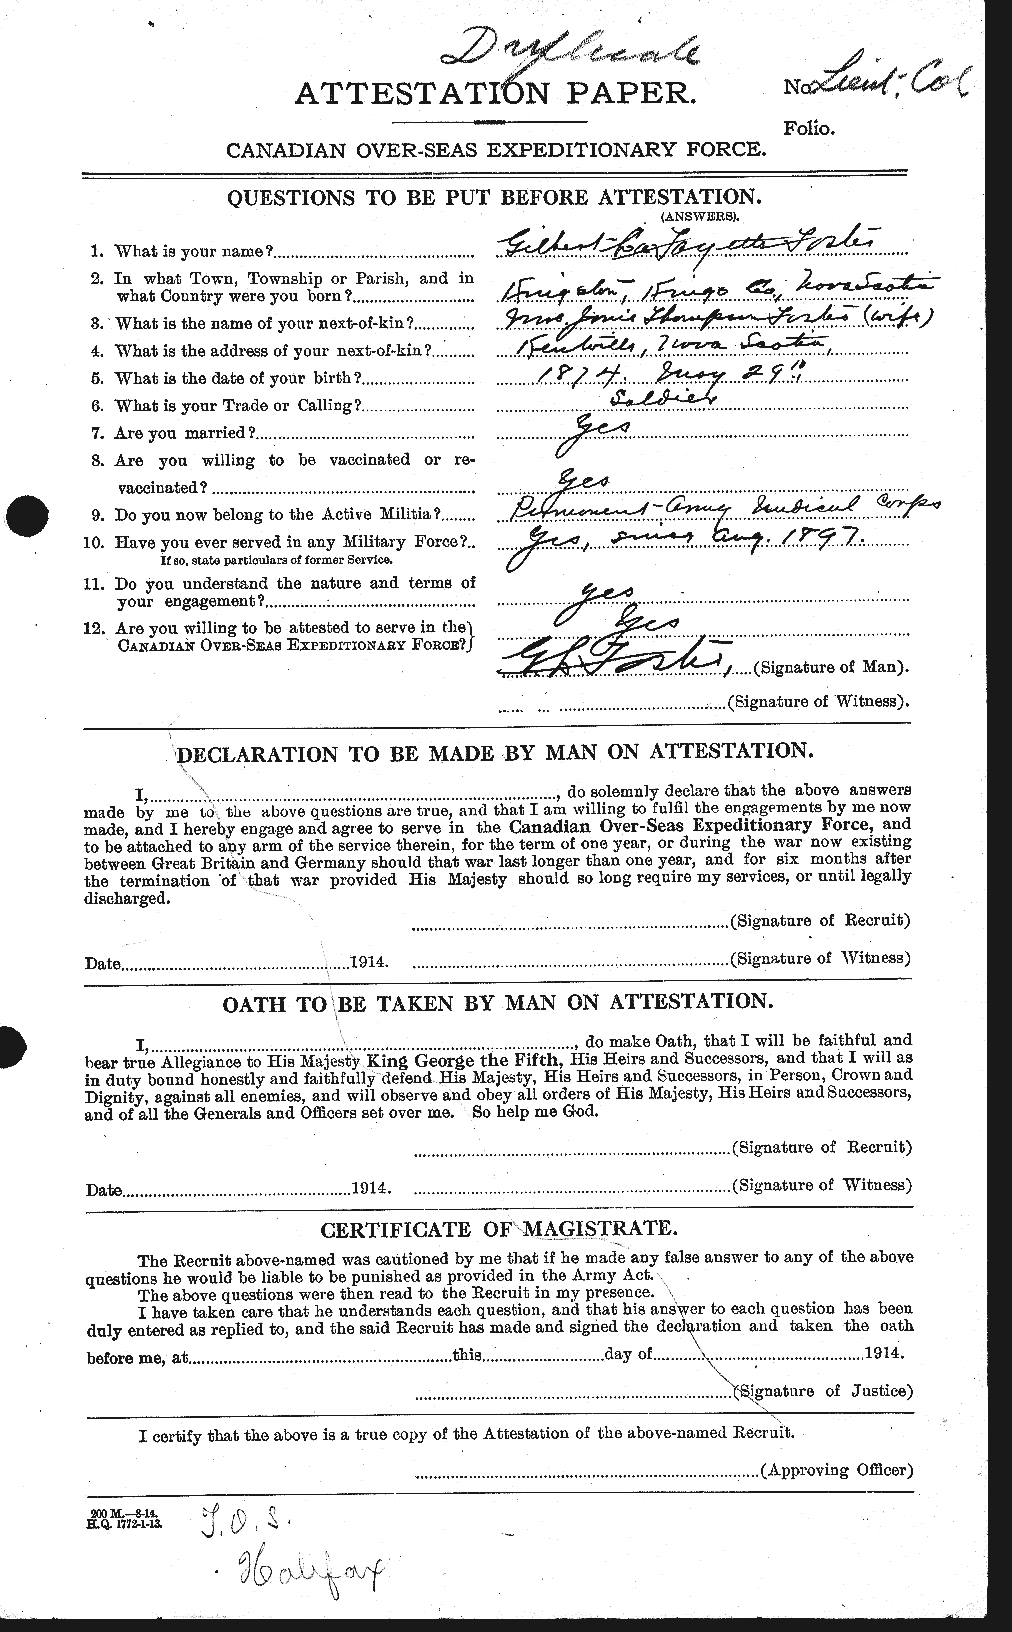 Personnel Records of the First World War - CEF 330714a